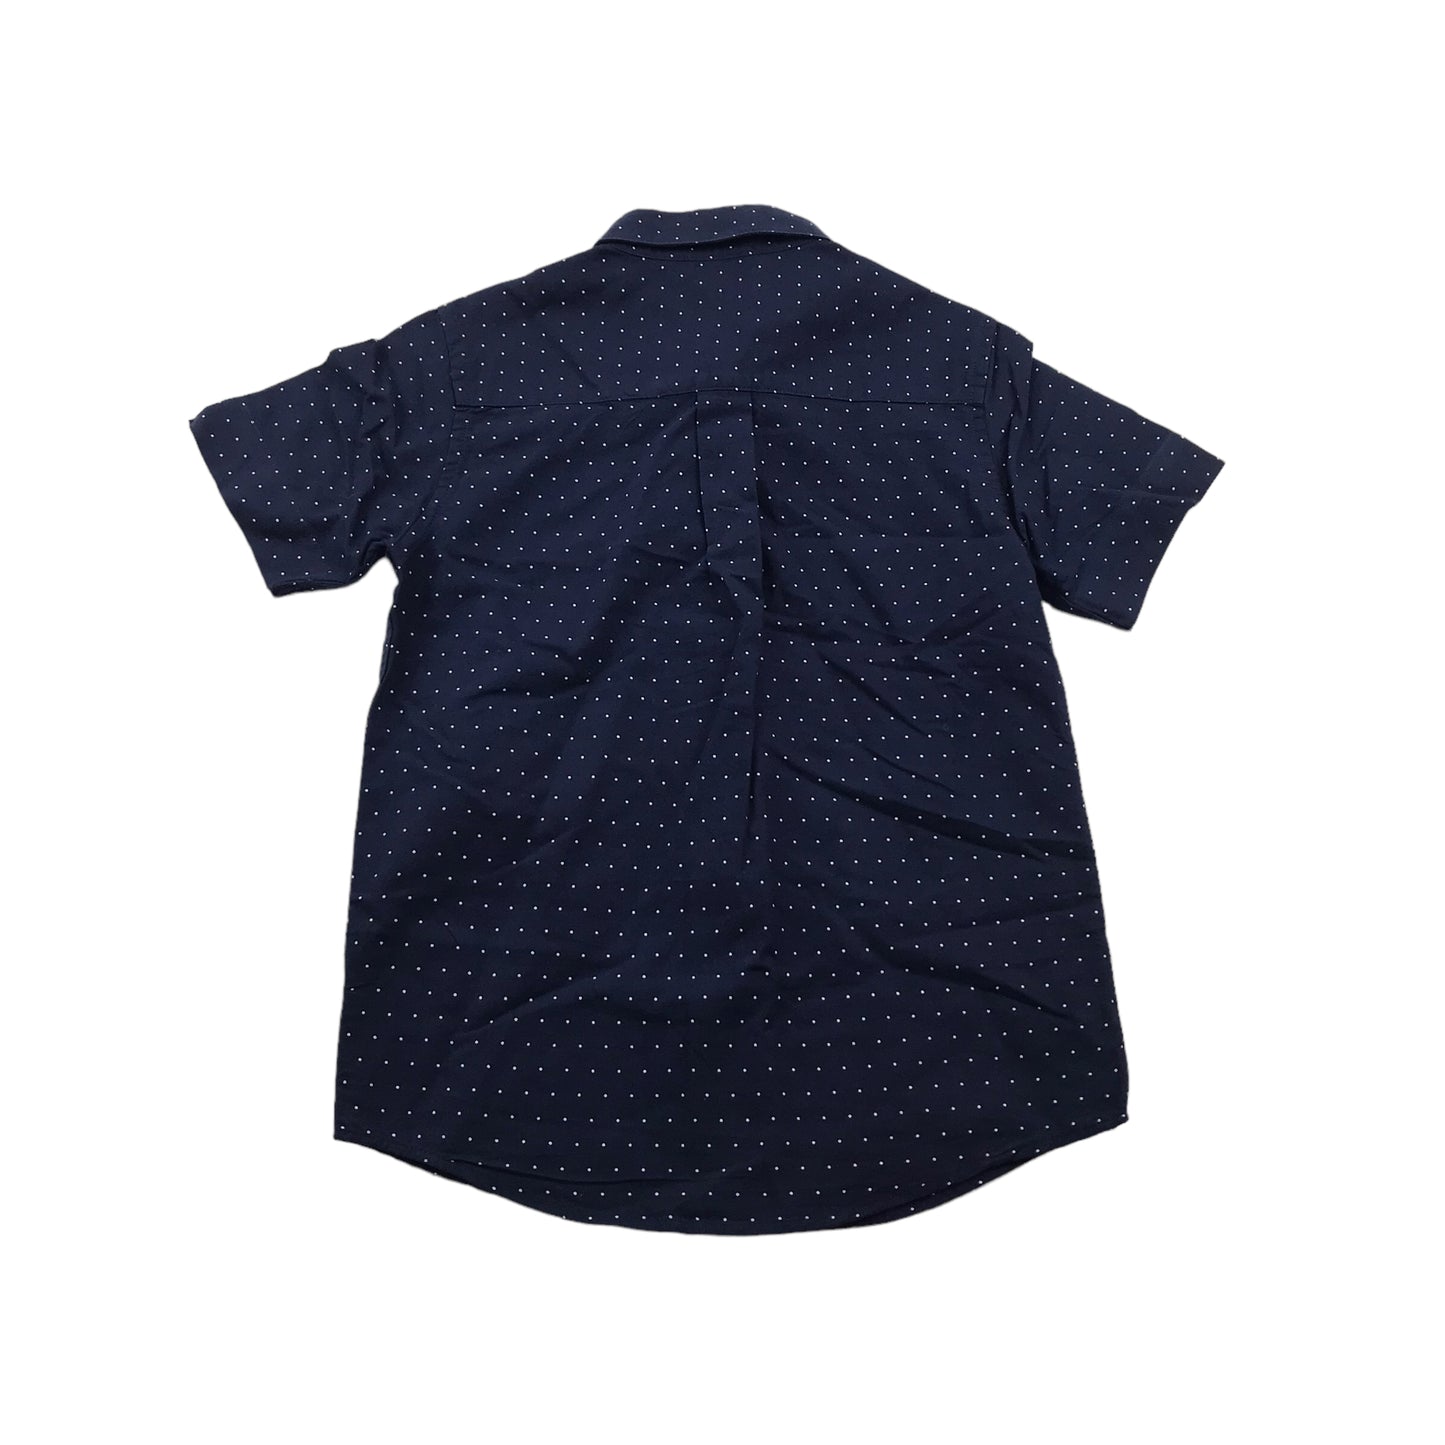 Maine Navy Blue Dotted Short Sleeve Shirt Age 9